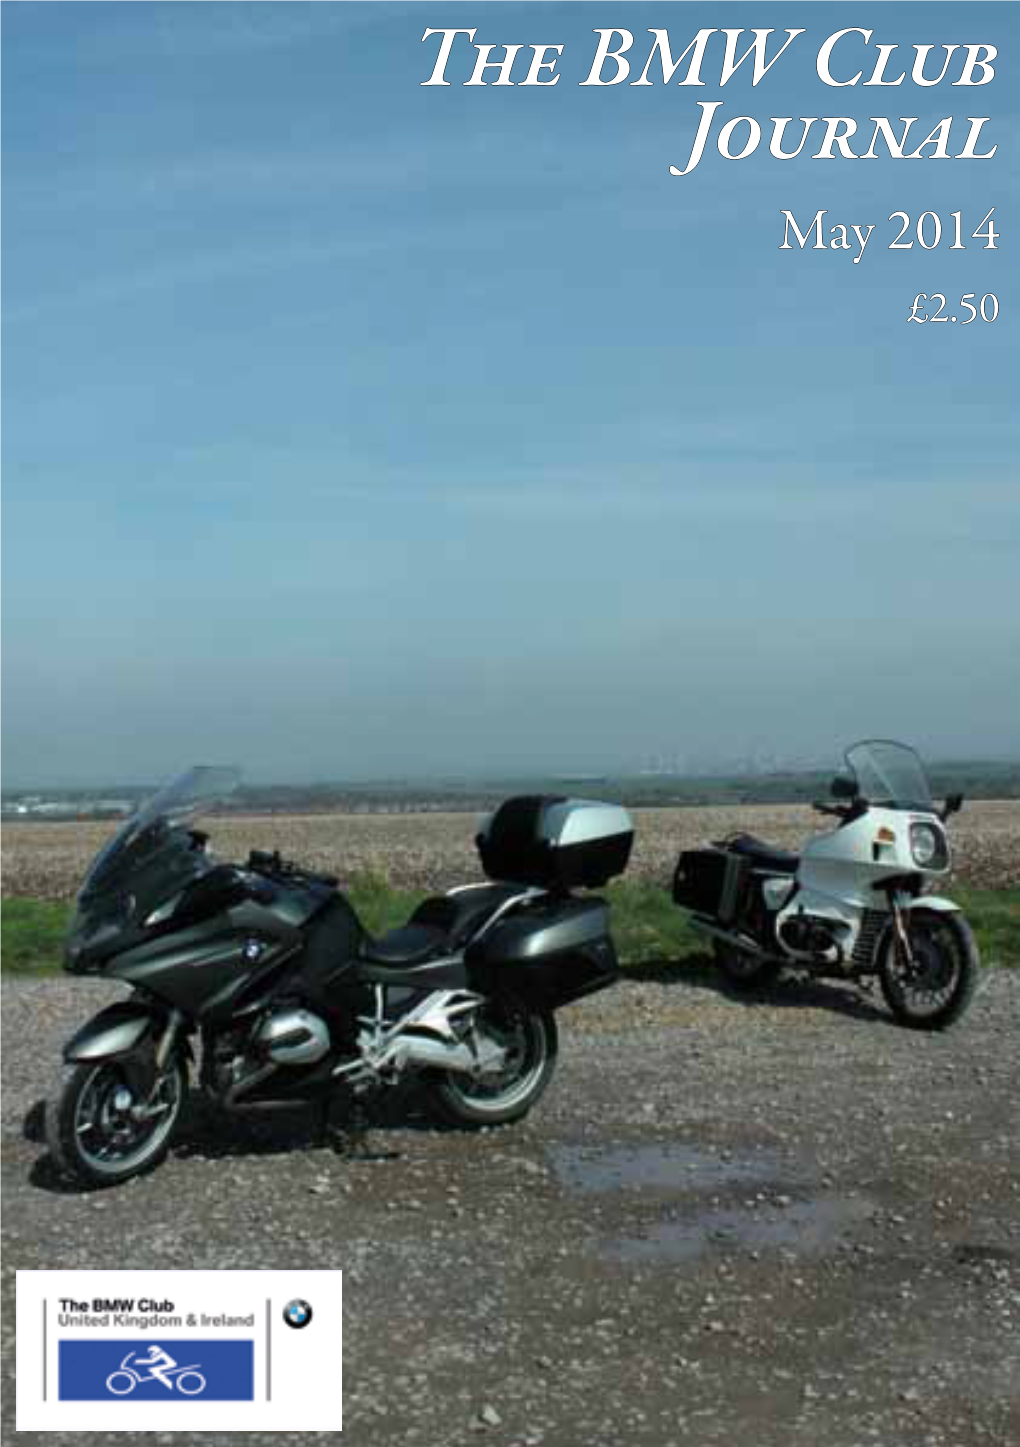 The BMW Club Journal May 2014 £2.50